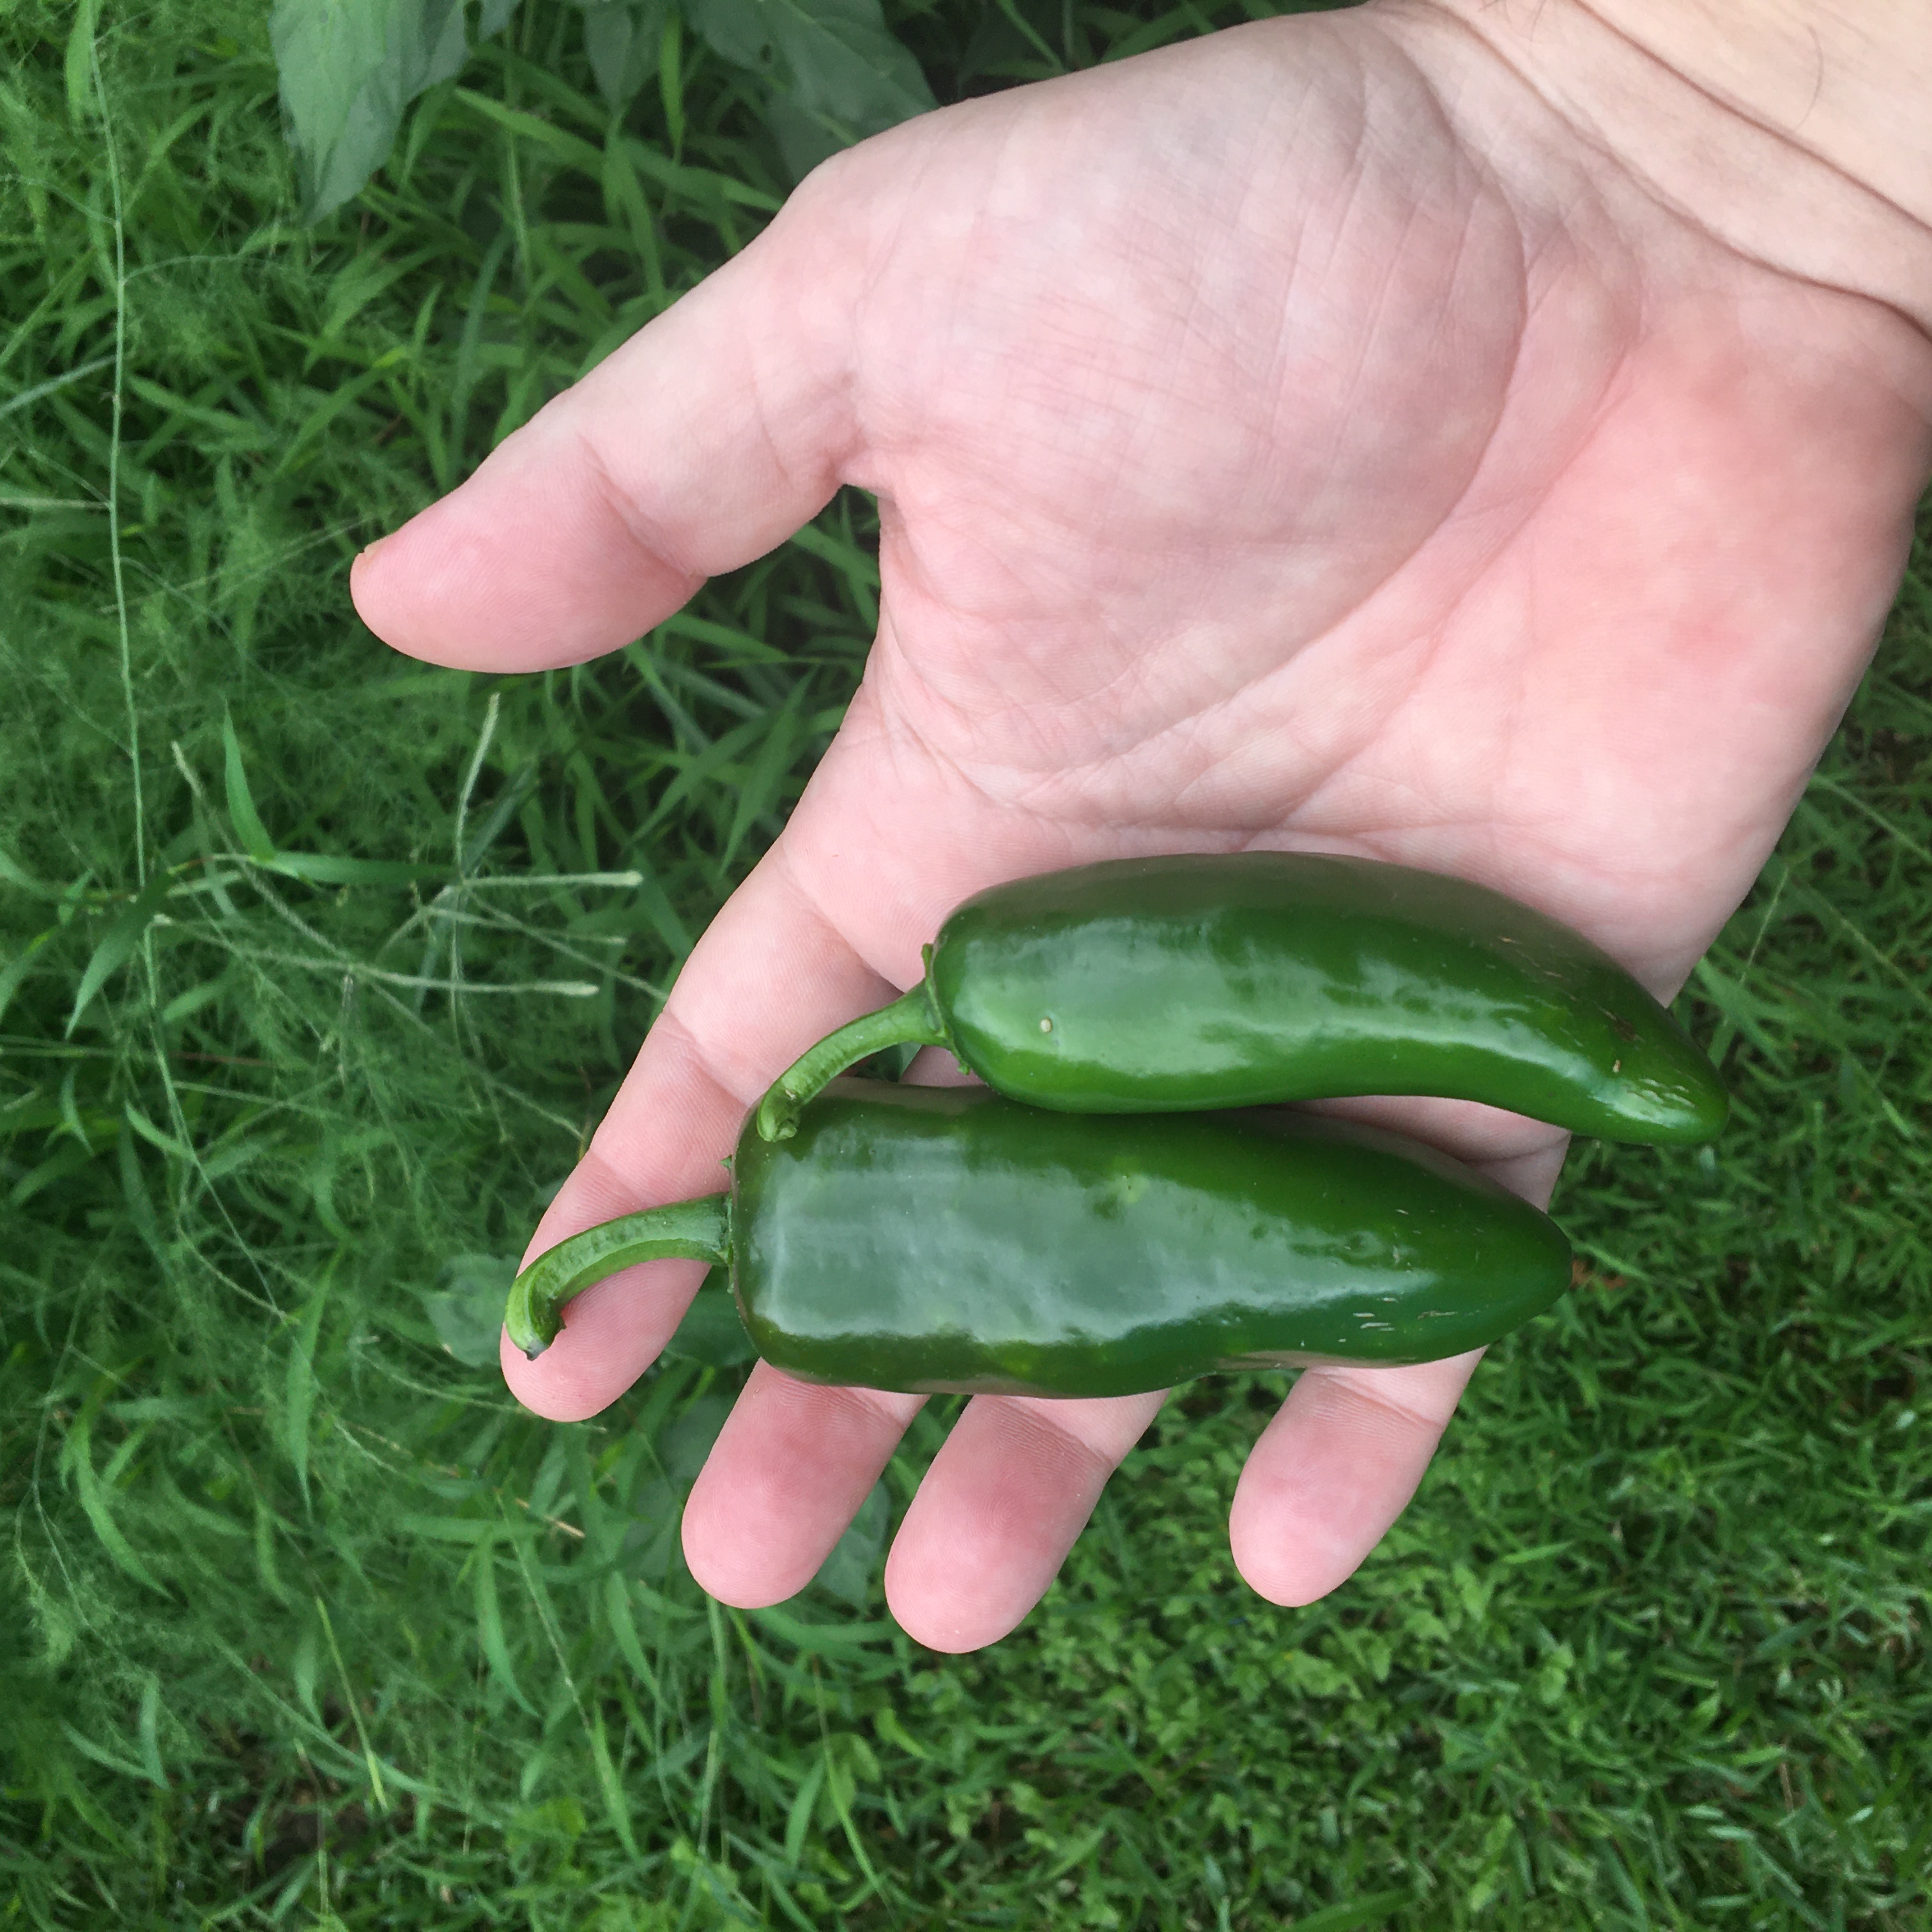 Jalapeños I grew on Tricou Street in New Orleans. Photo by David Rhoden.